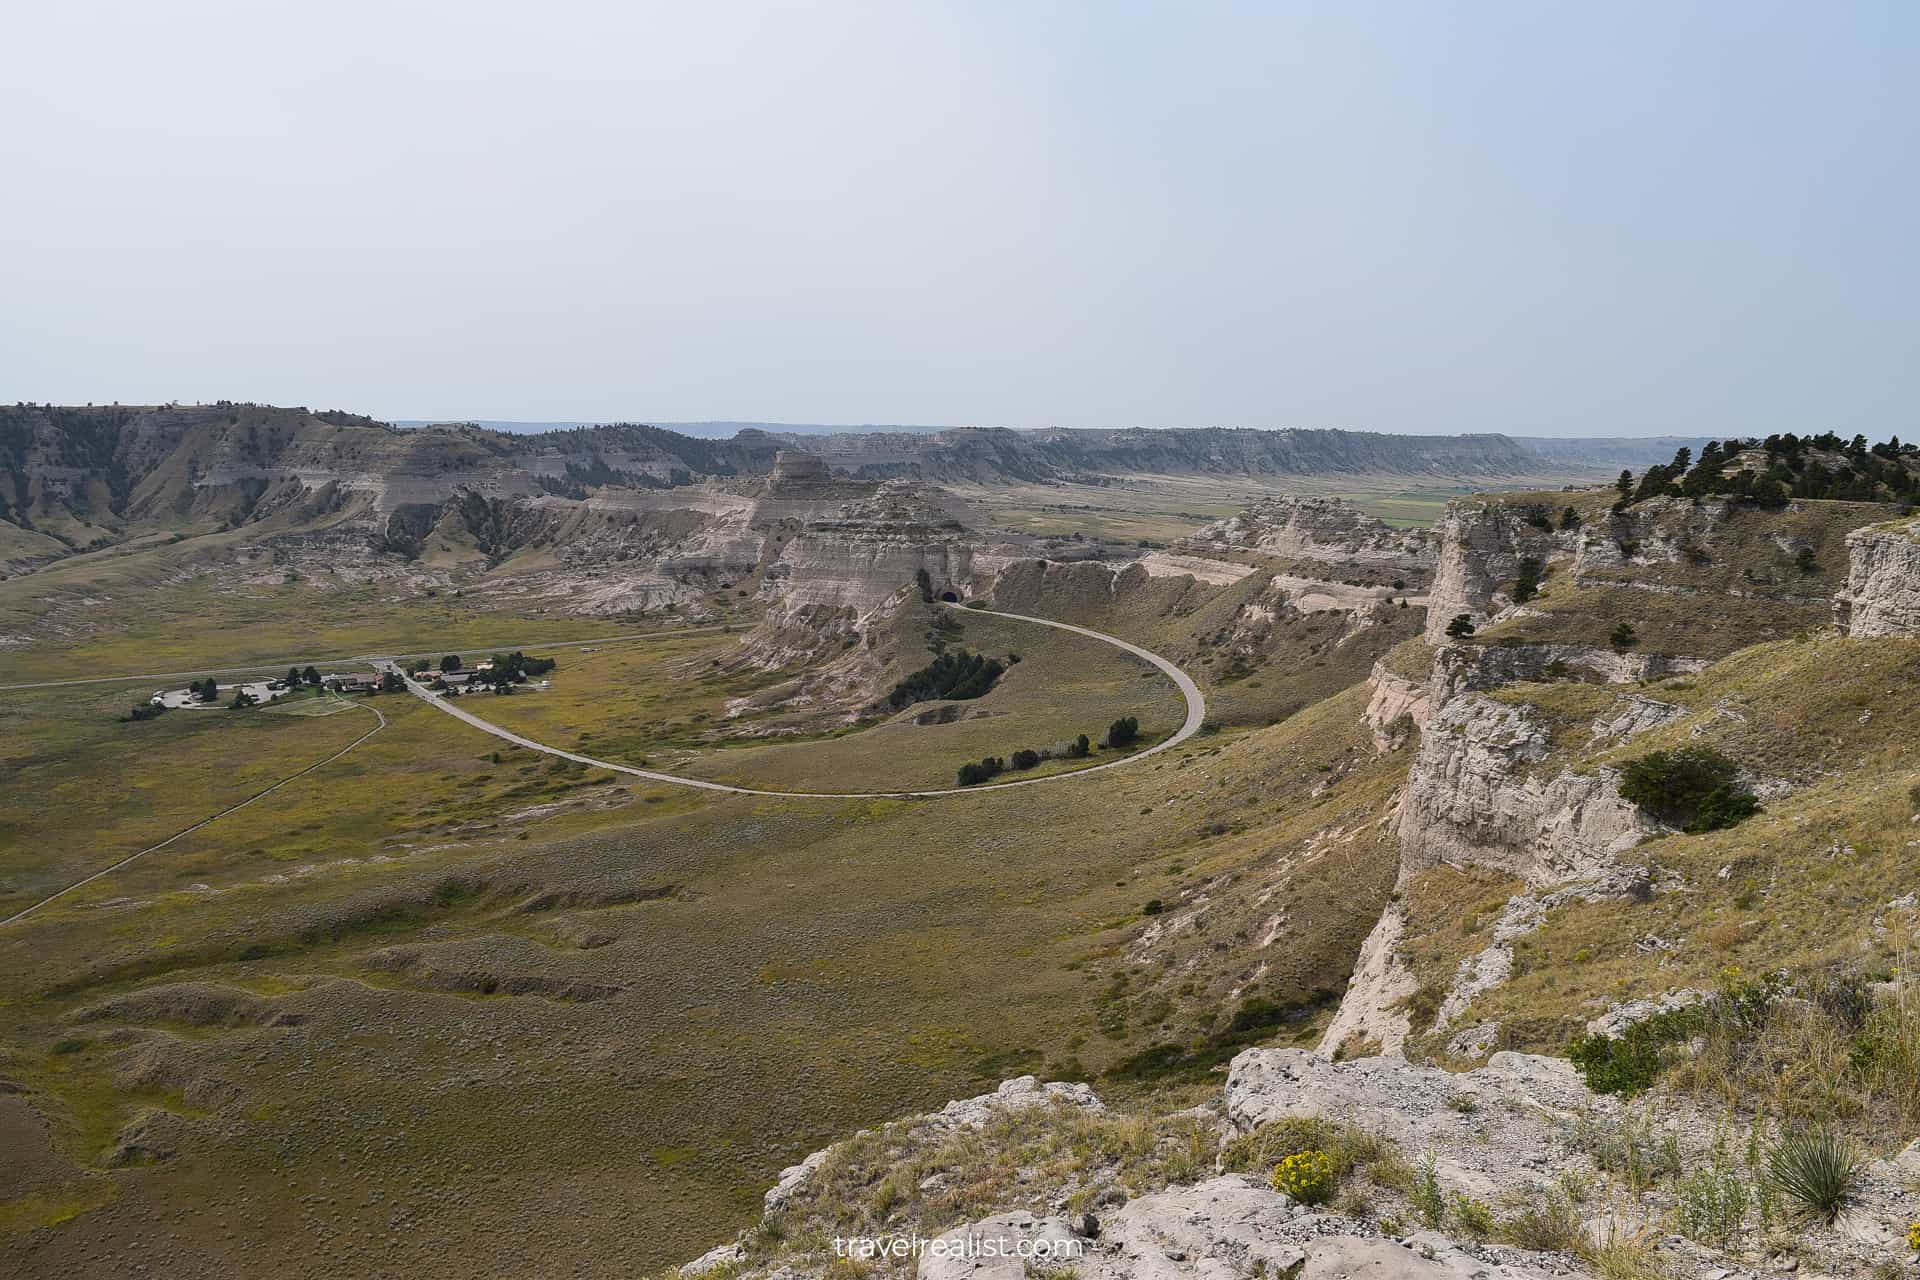 Views of museum and scenic turn from top of Scotts Bluff National Monument in Nebraska, US